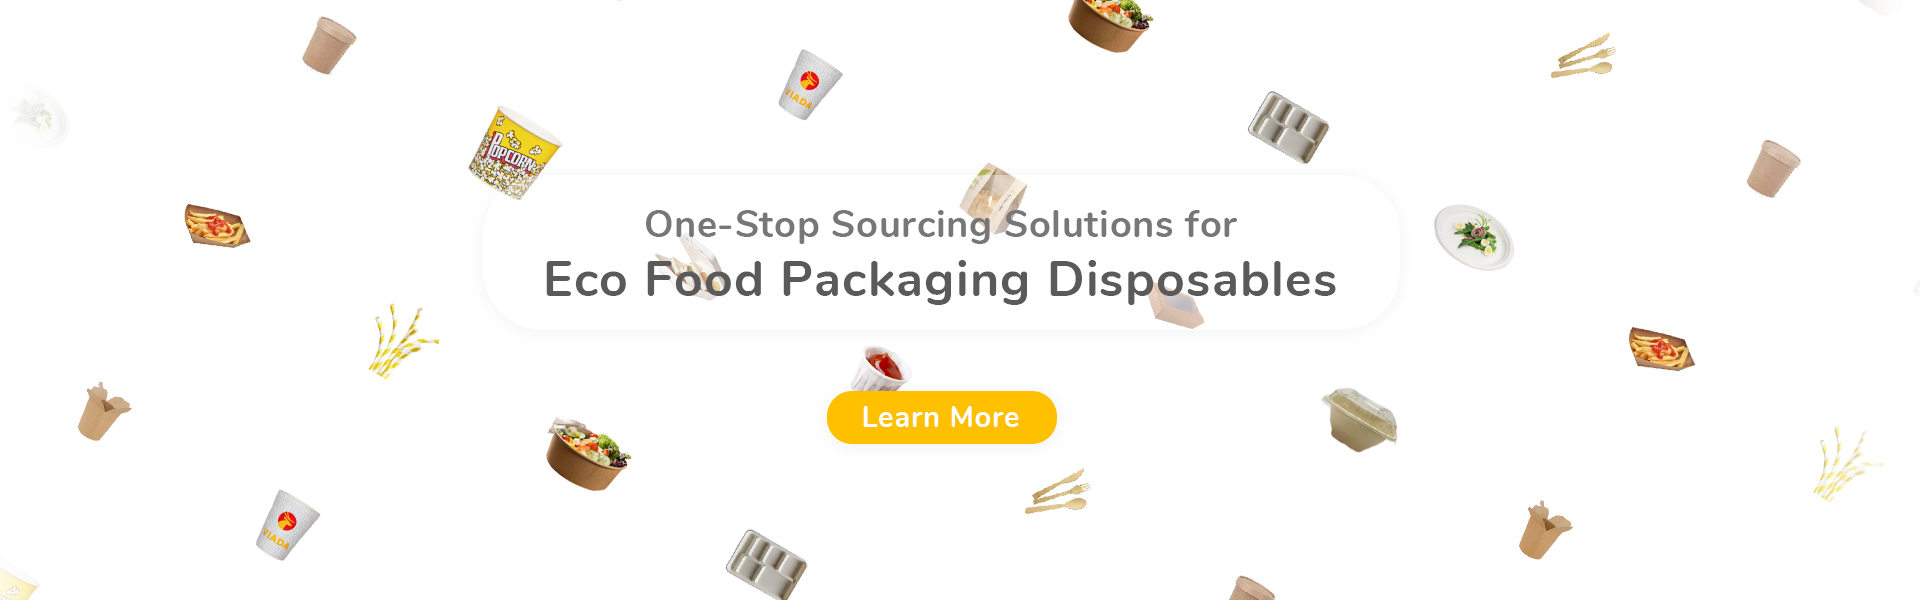 One Stop Sourcing Solution Eco Food Packaging Disposables 